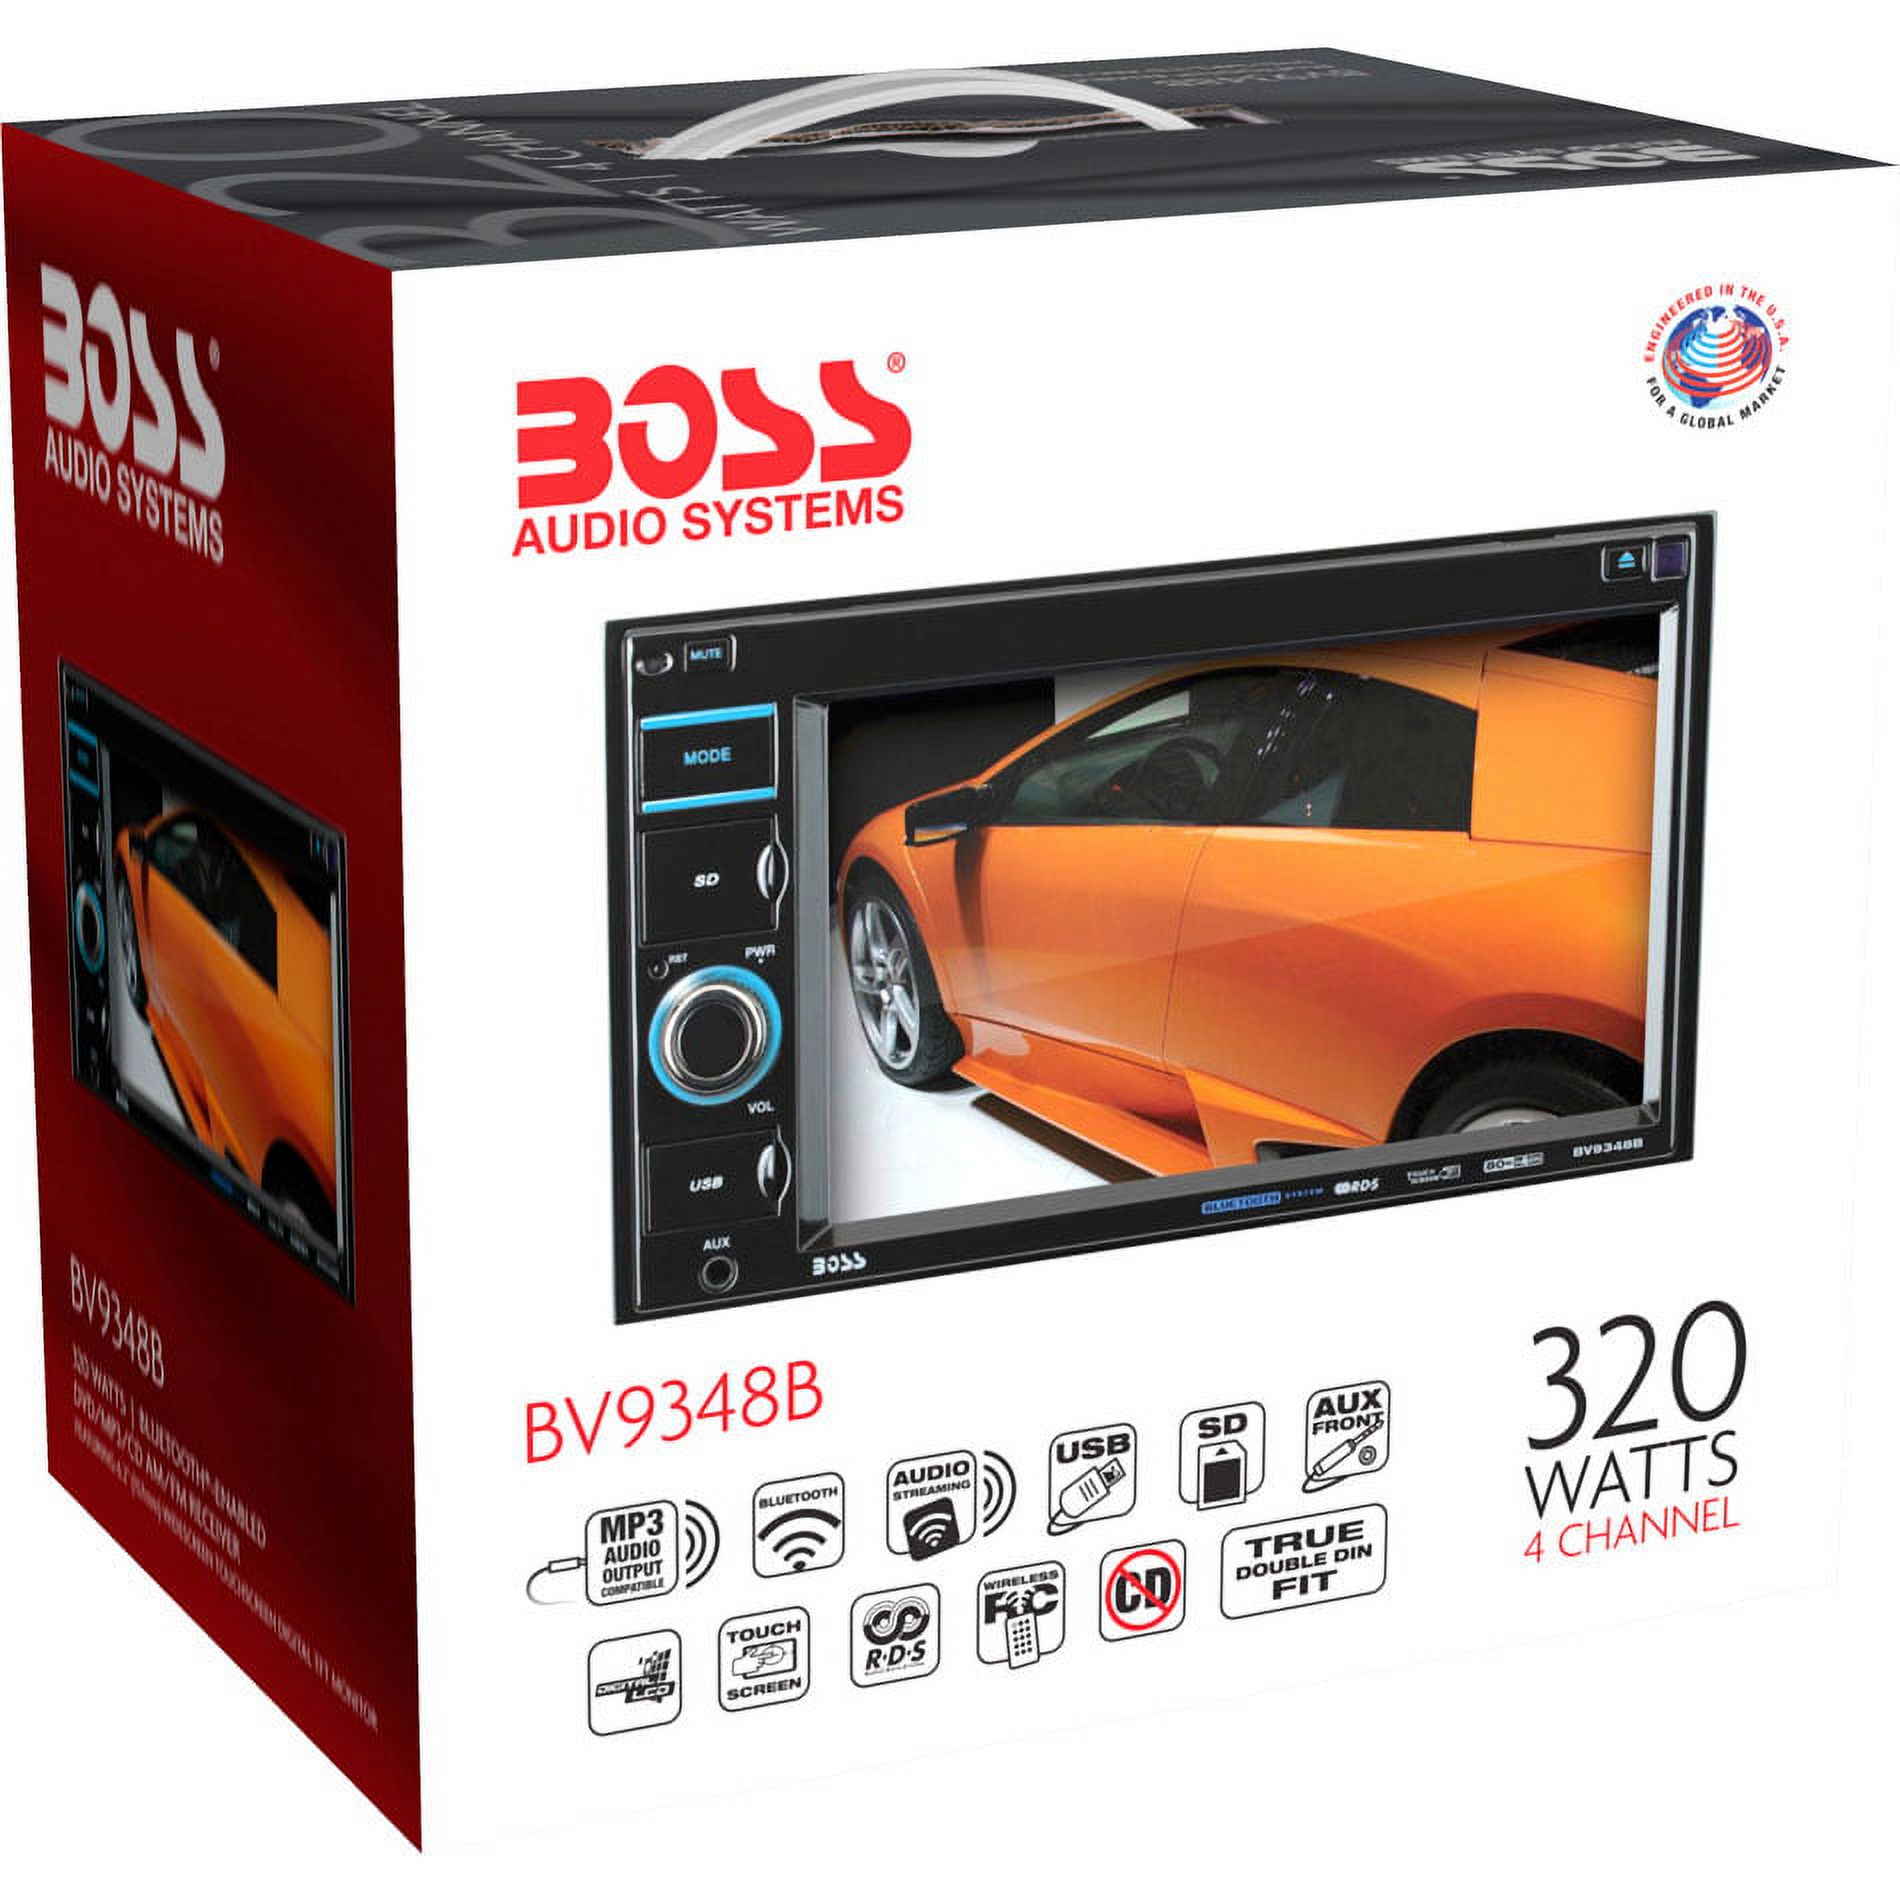 Boss BV9348B 6.2" Touch Mechless Double-DIN with USB/SD/AUX Input - image 4 of 8